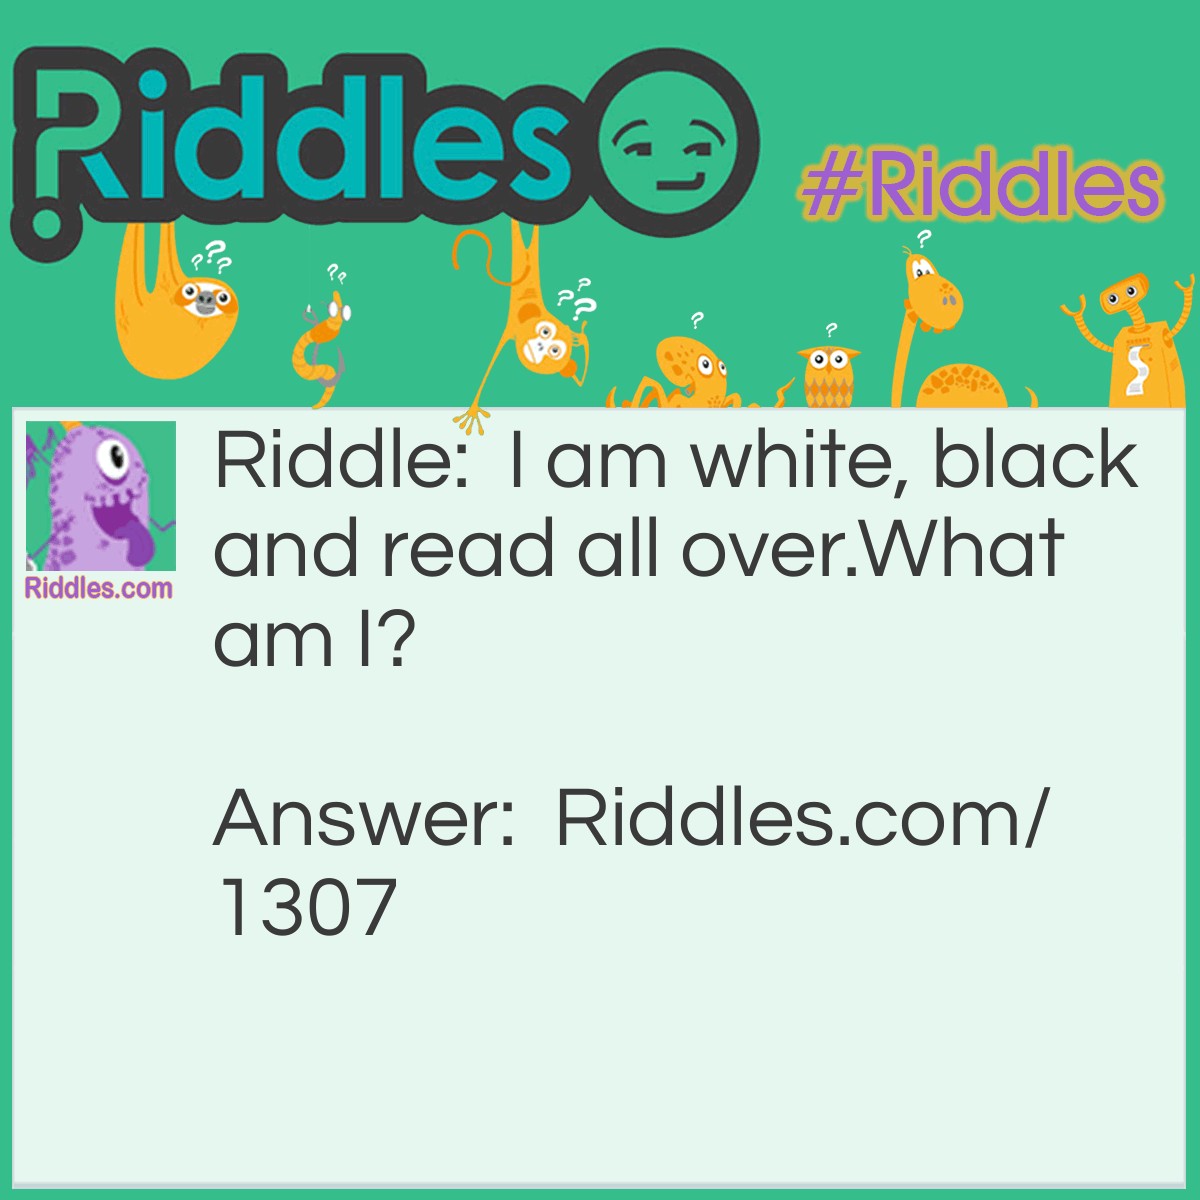 Riddle: I am white, black and read all over.
What am I? Answer: A Newspaper.